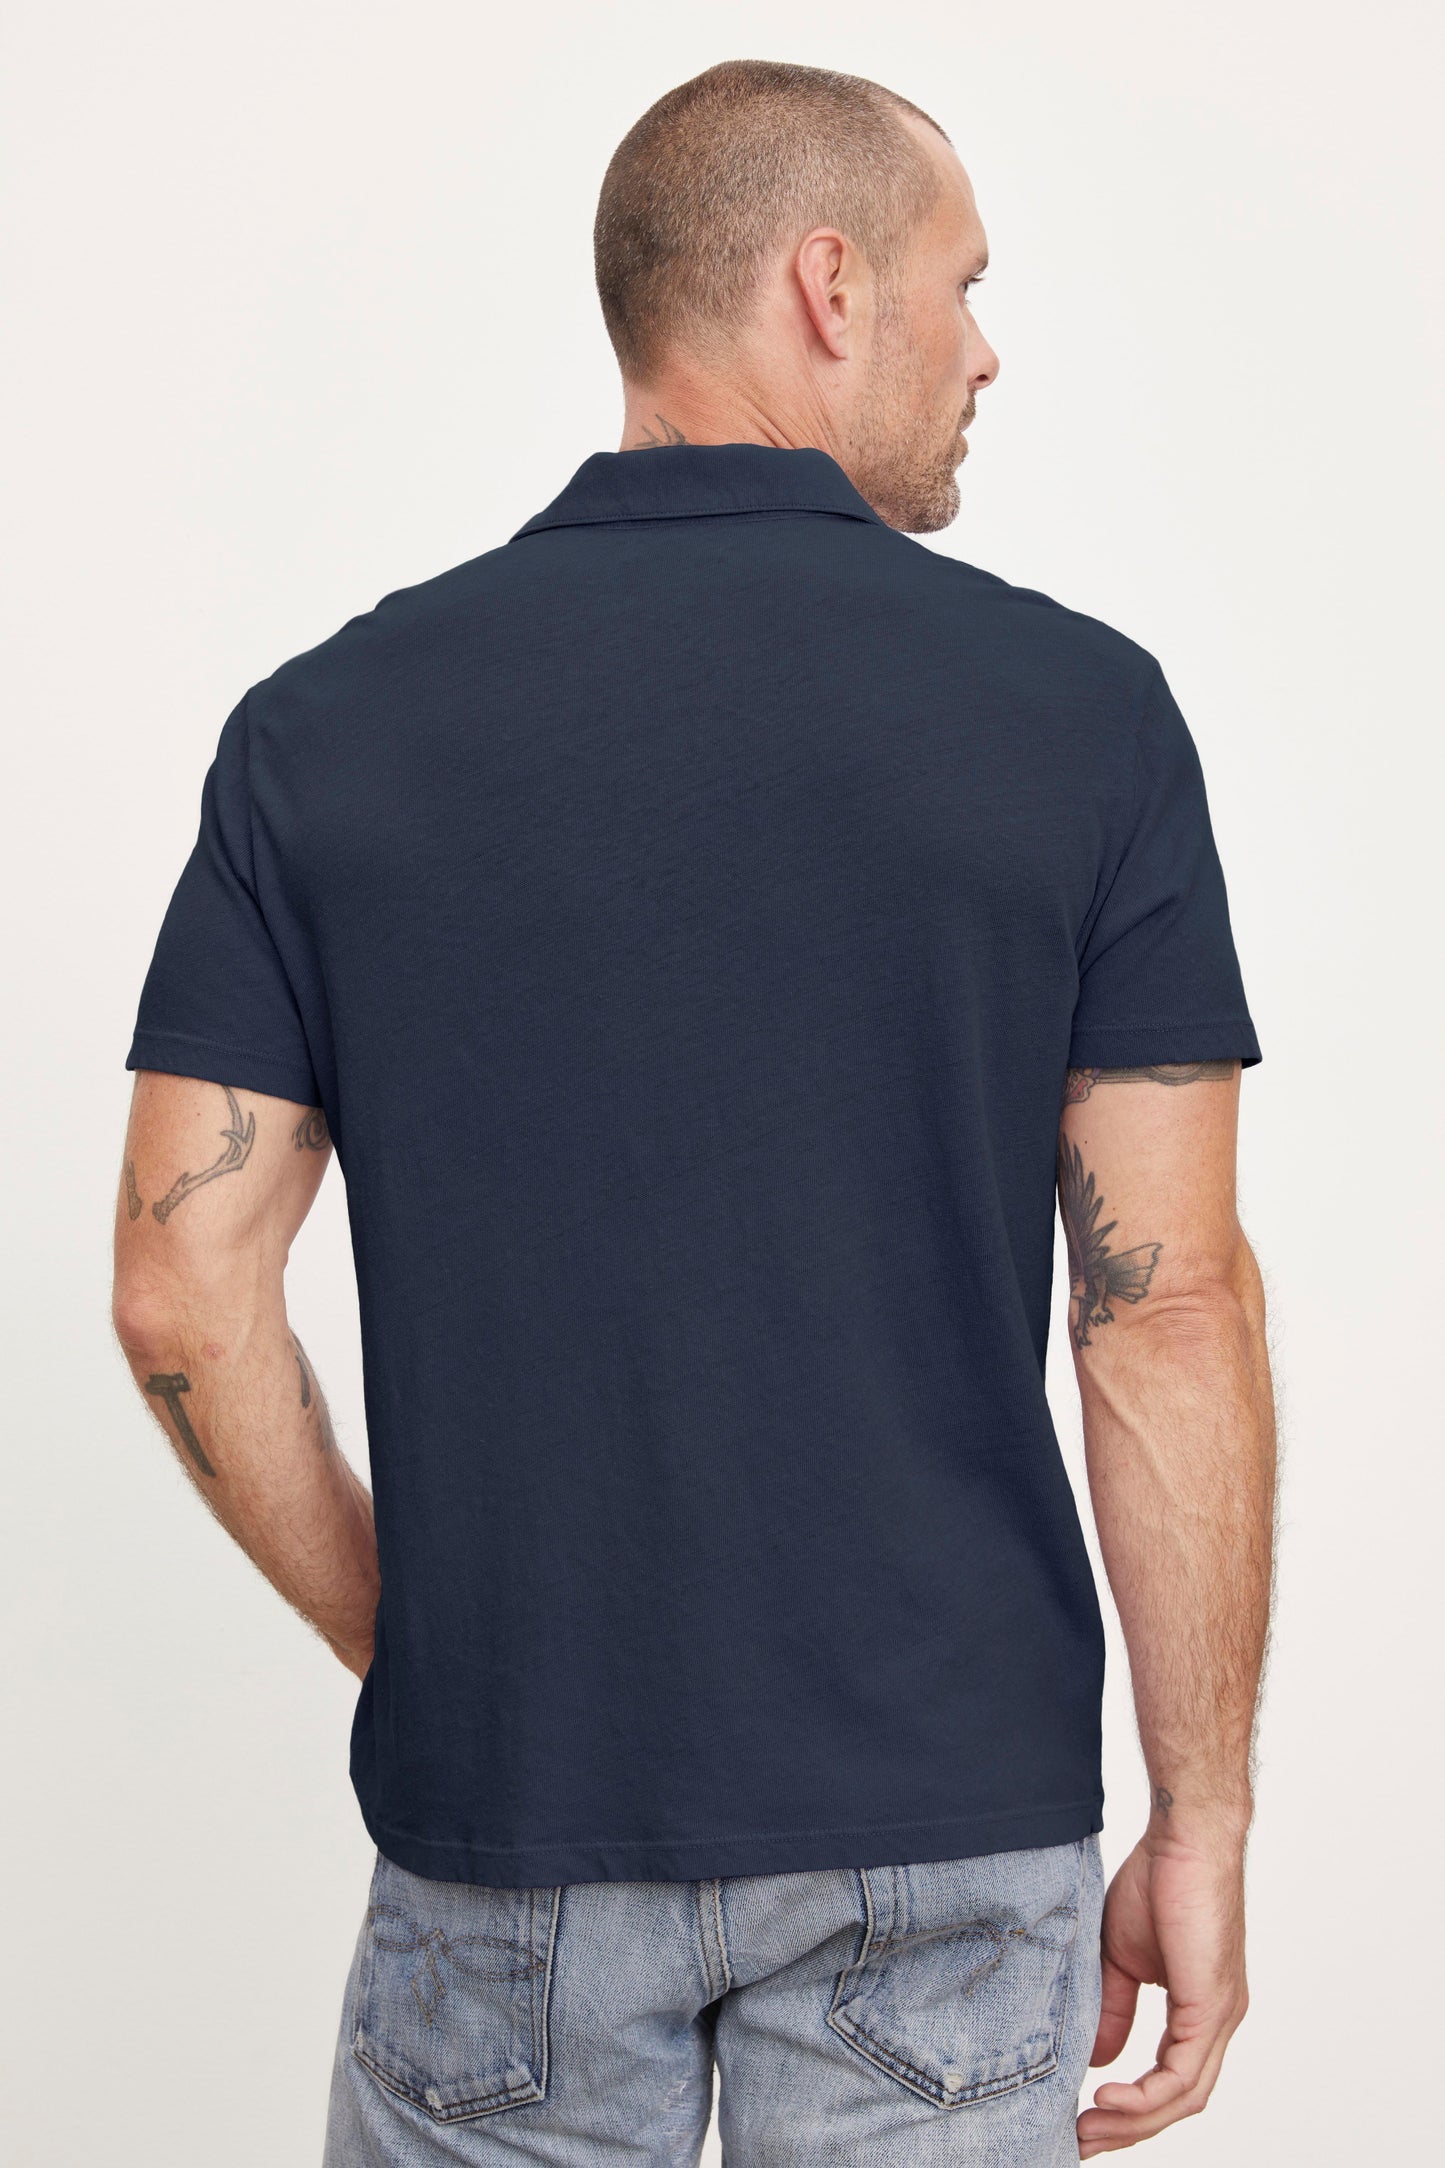 Man wearing a Velvet by Graham & Spencer BECK POLO and jeans, viewed from behind, with visible tattoos on his left arm.-36890691862721